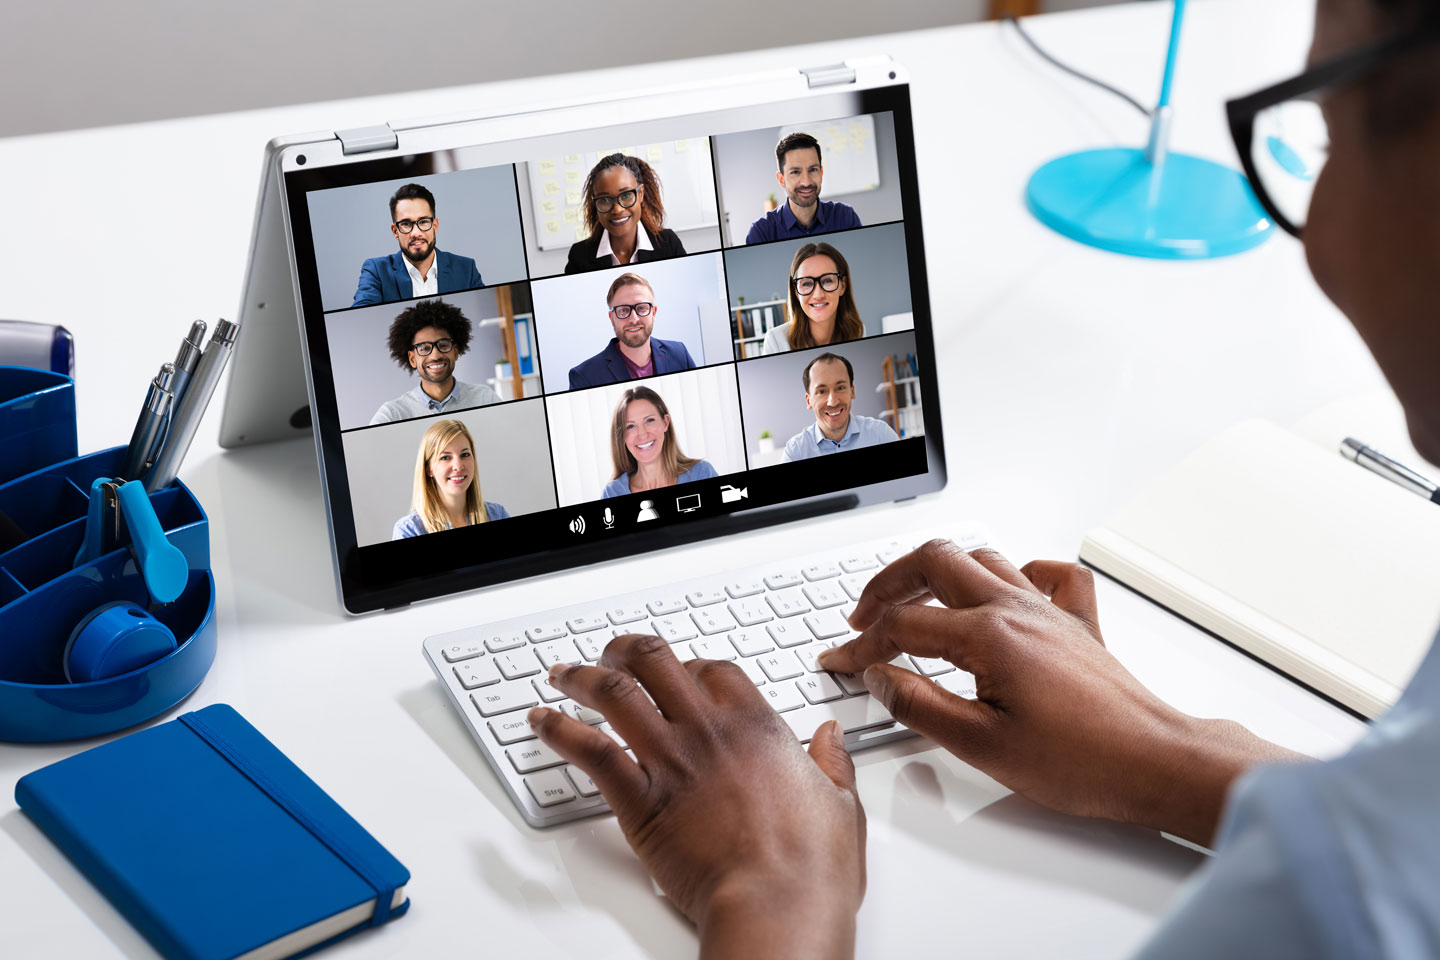 Video conference call with multiple people